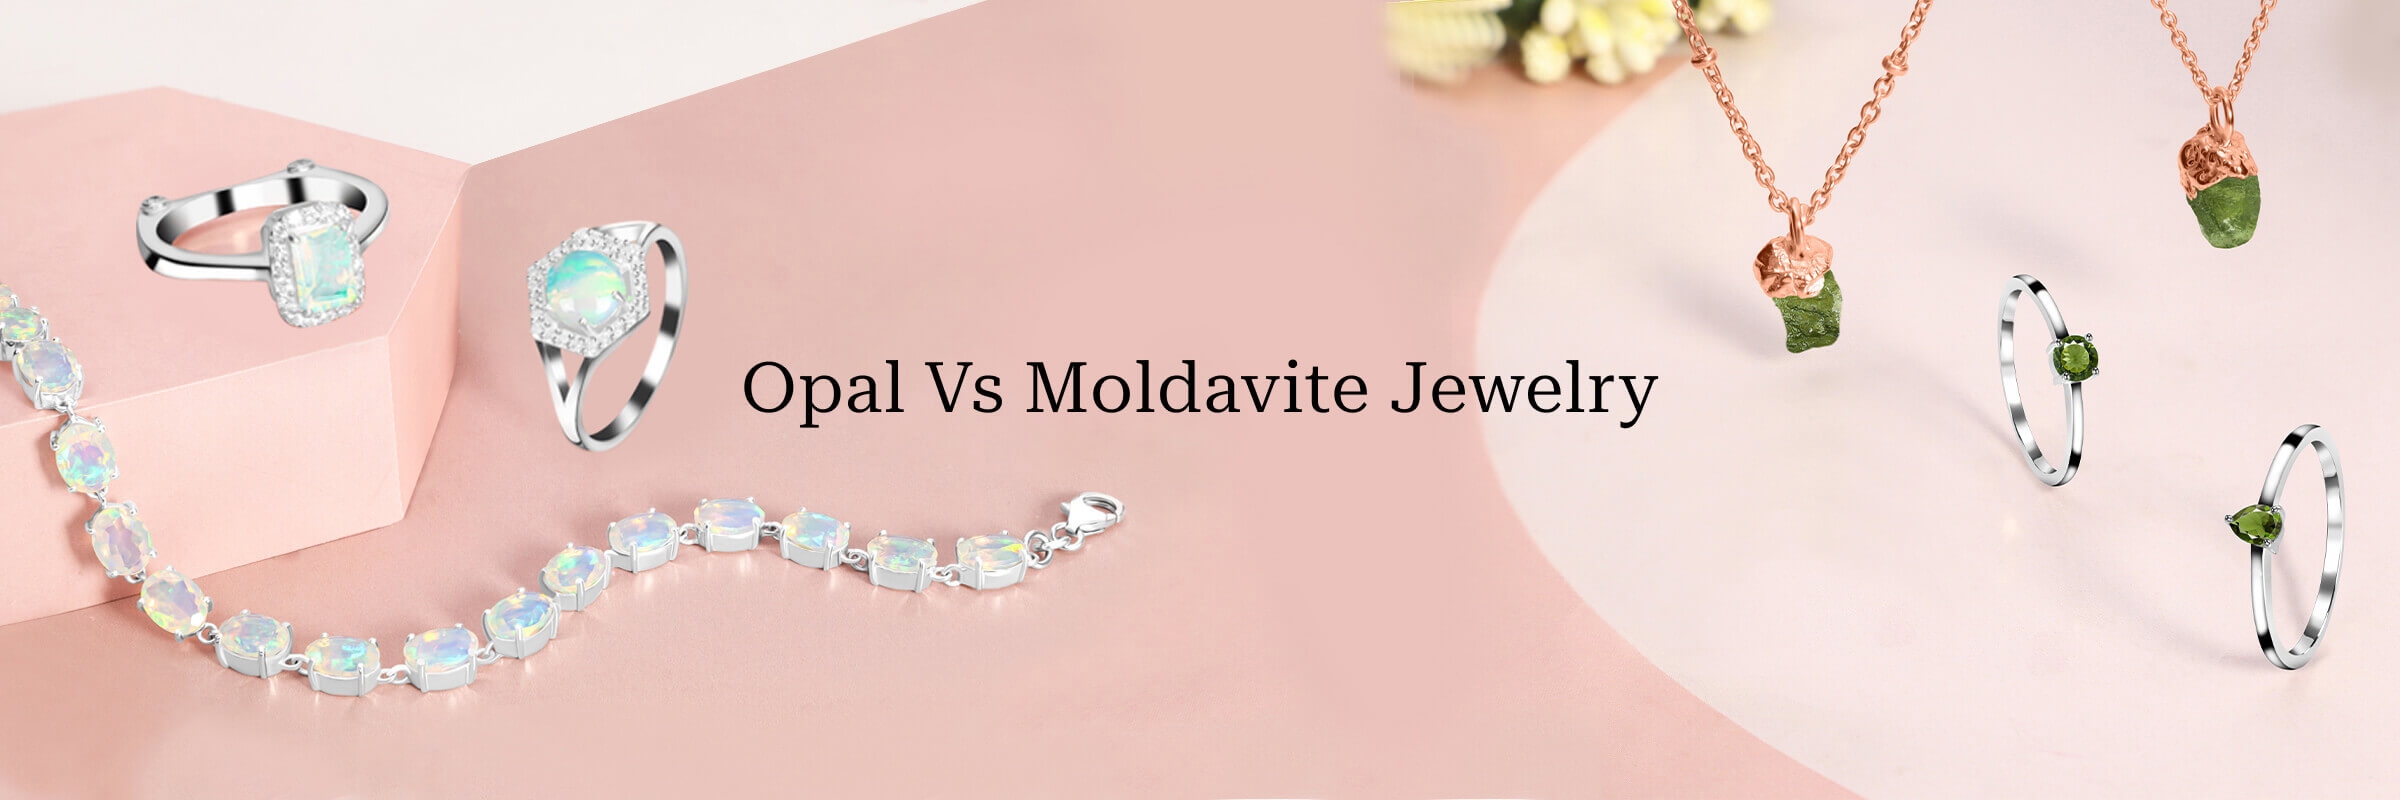 Opal Vs Moldavite Jewelry - What's The Difference 1